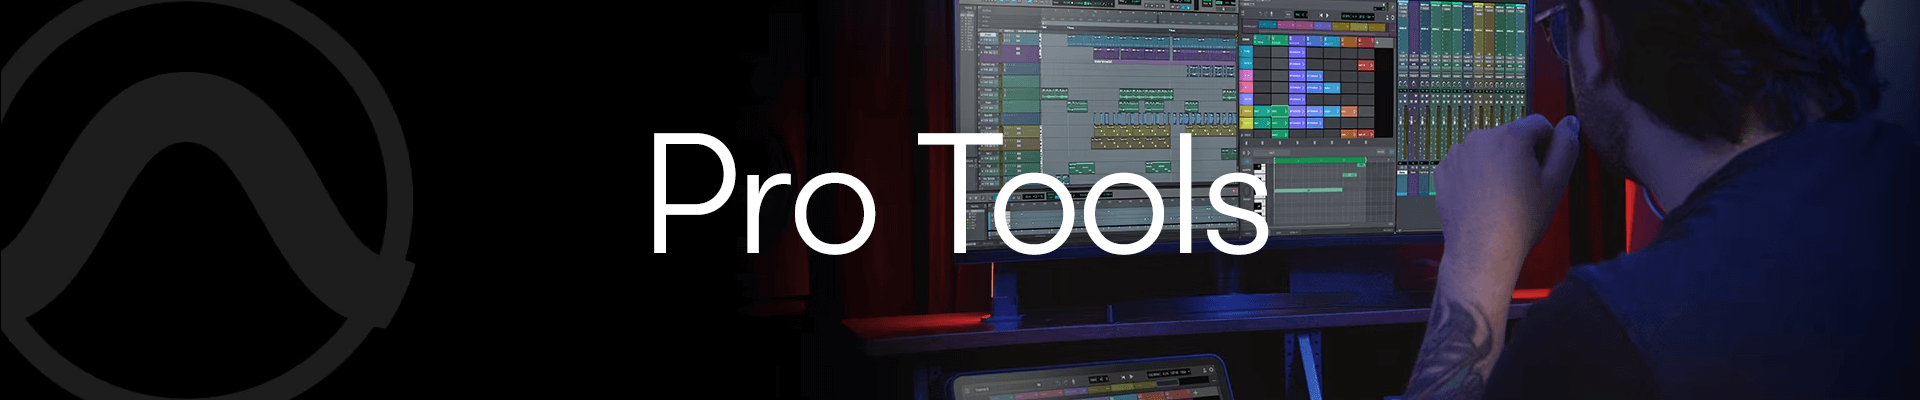 Pro Tools Banner